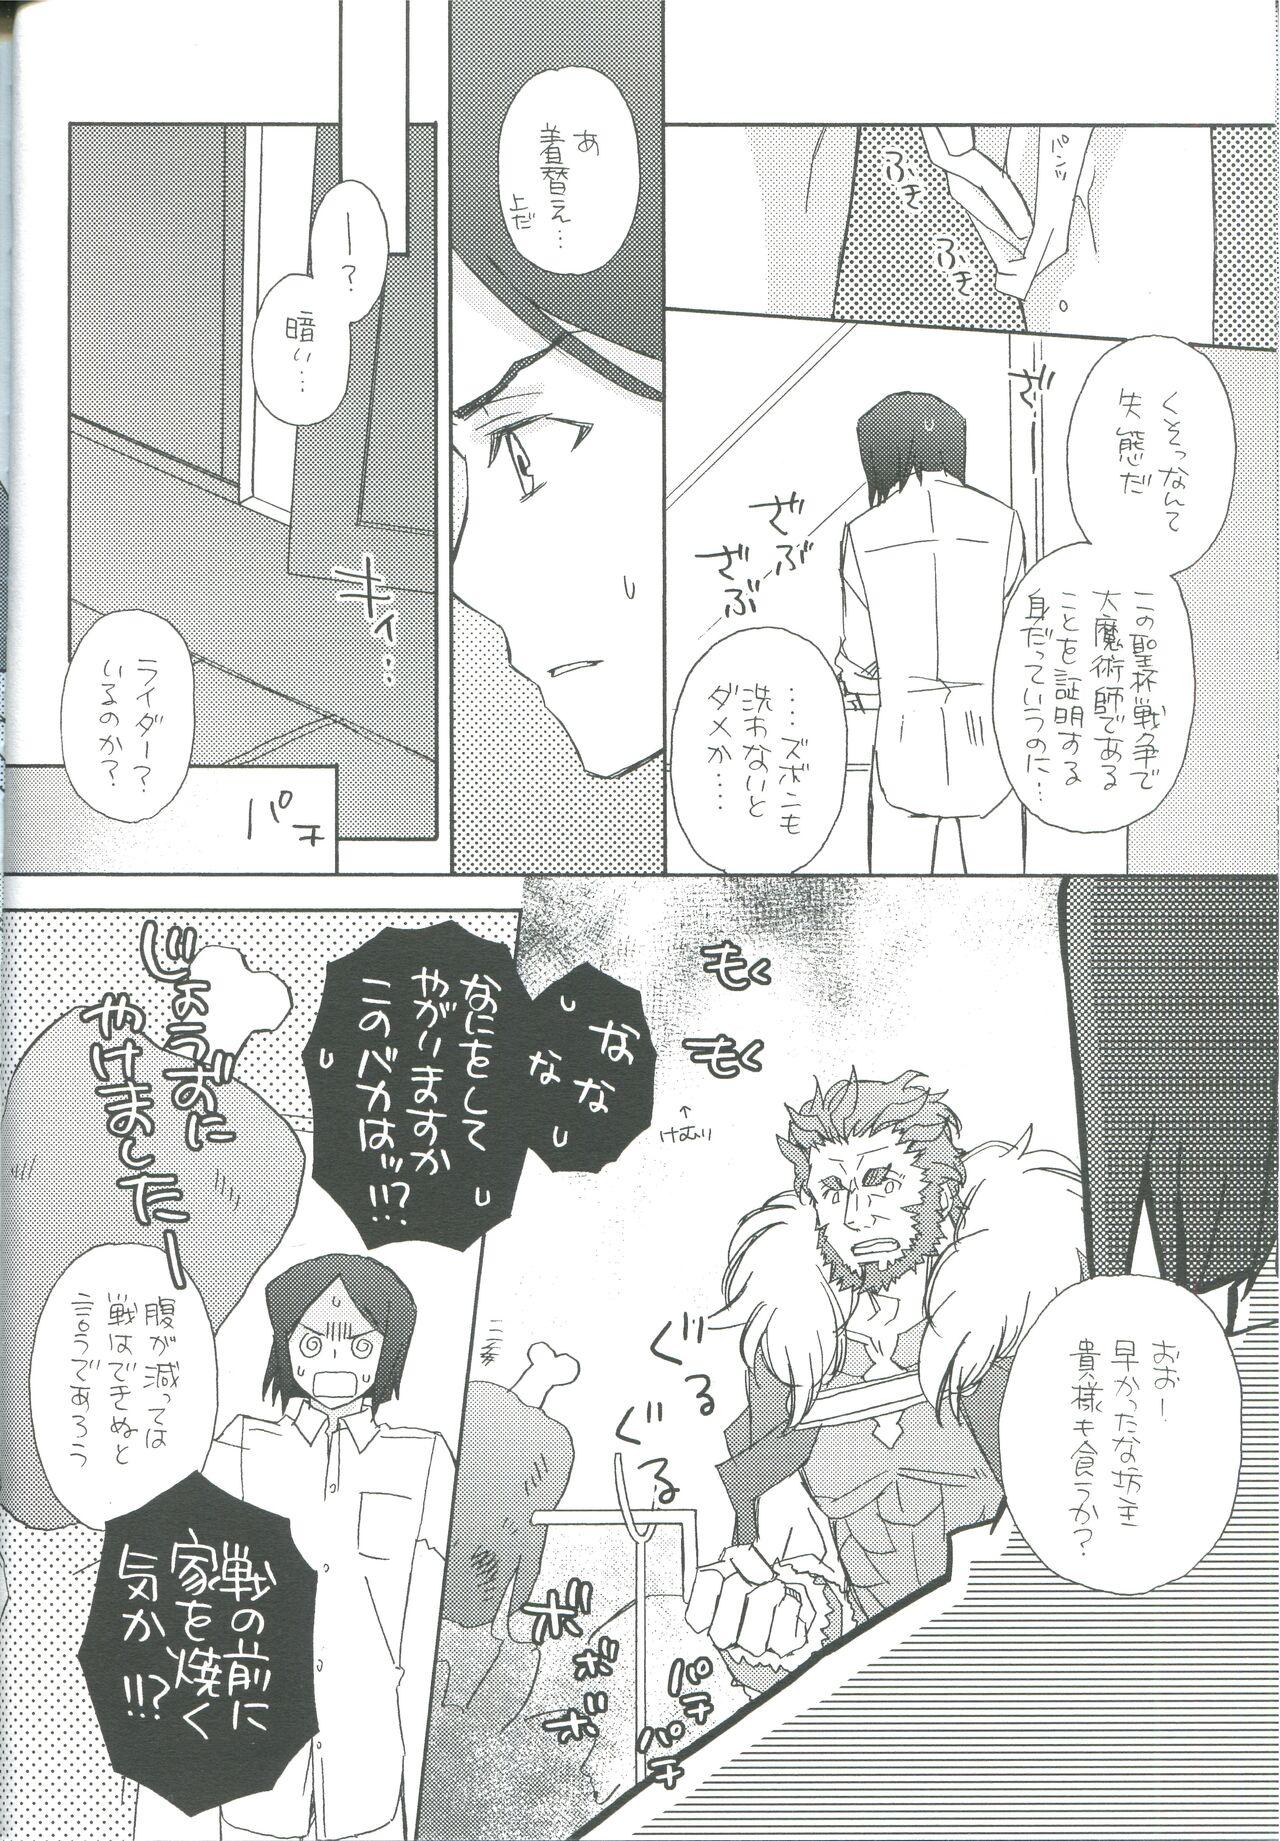 Audition INTERMISSION - Fate zero Hung - Page 6